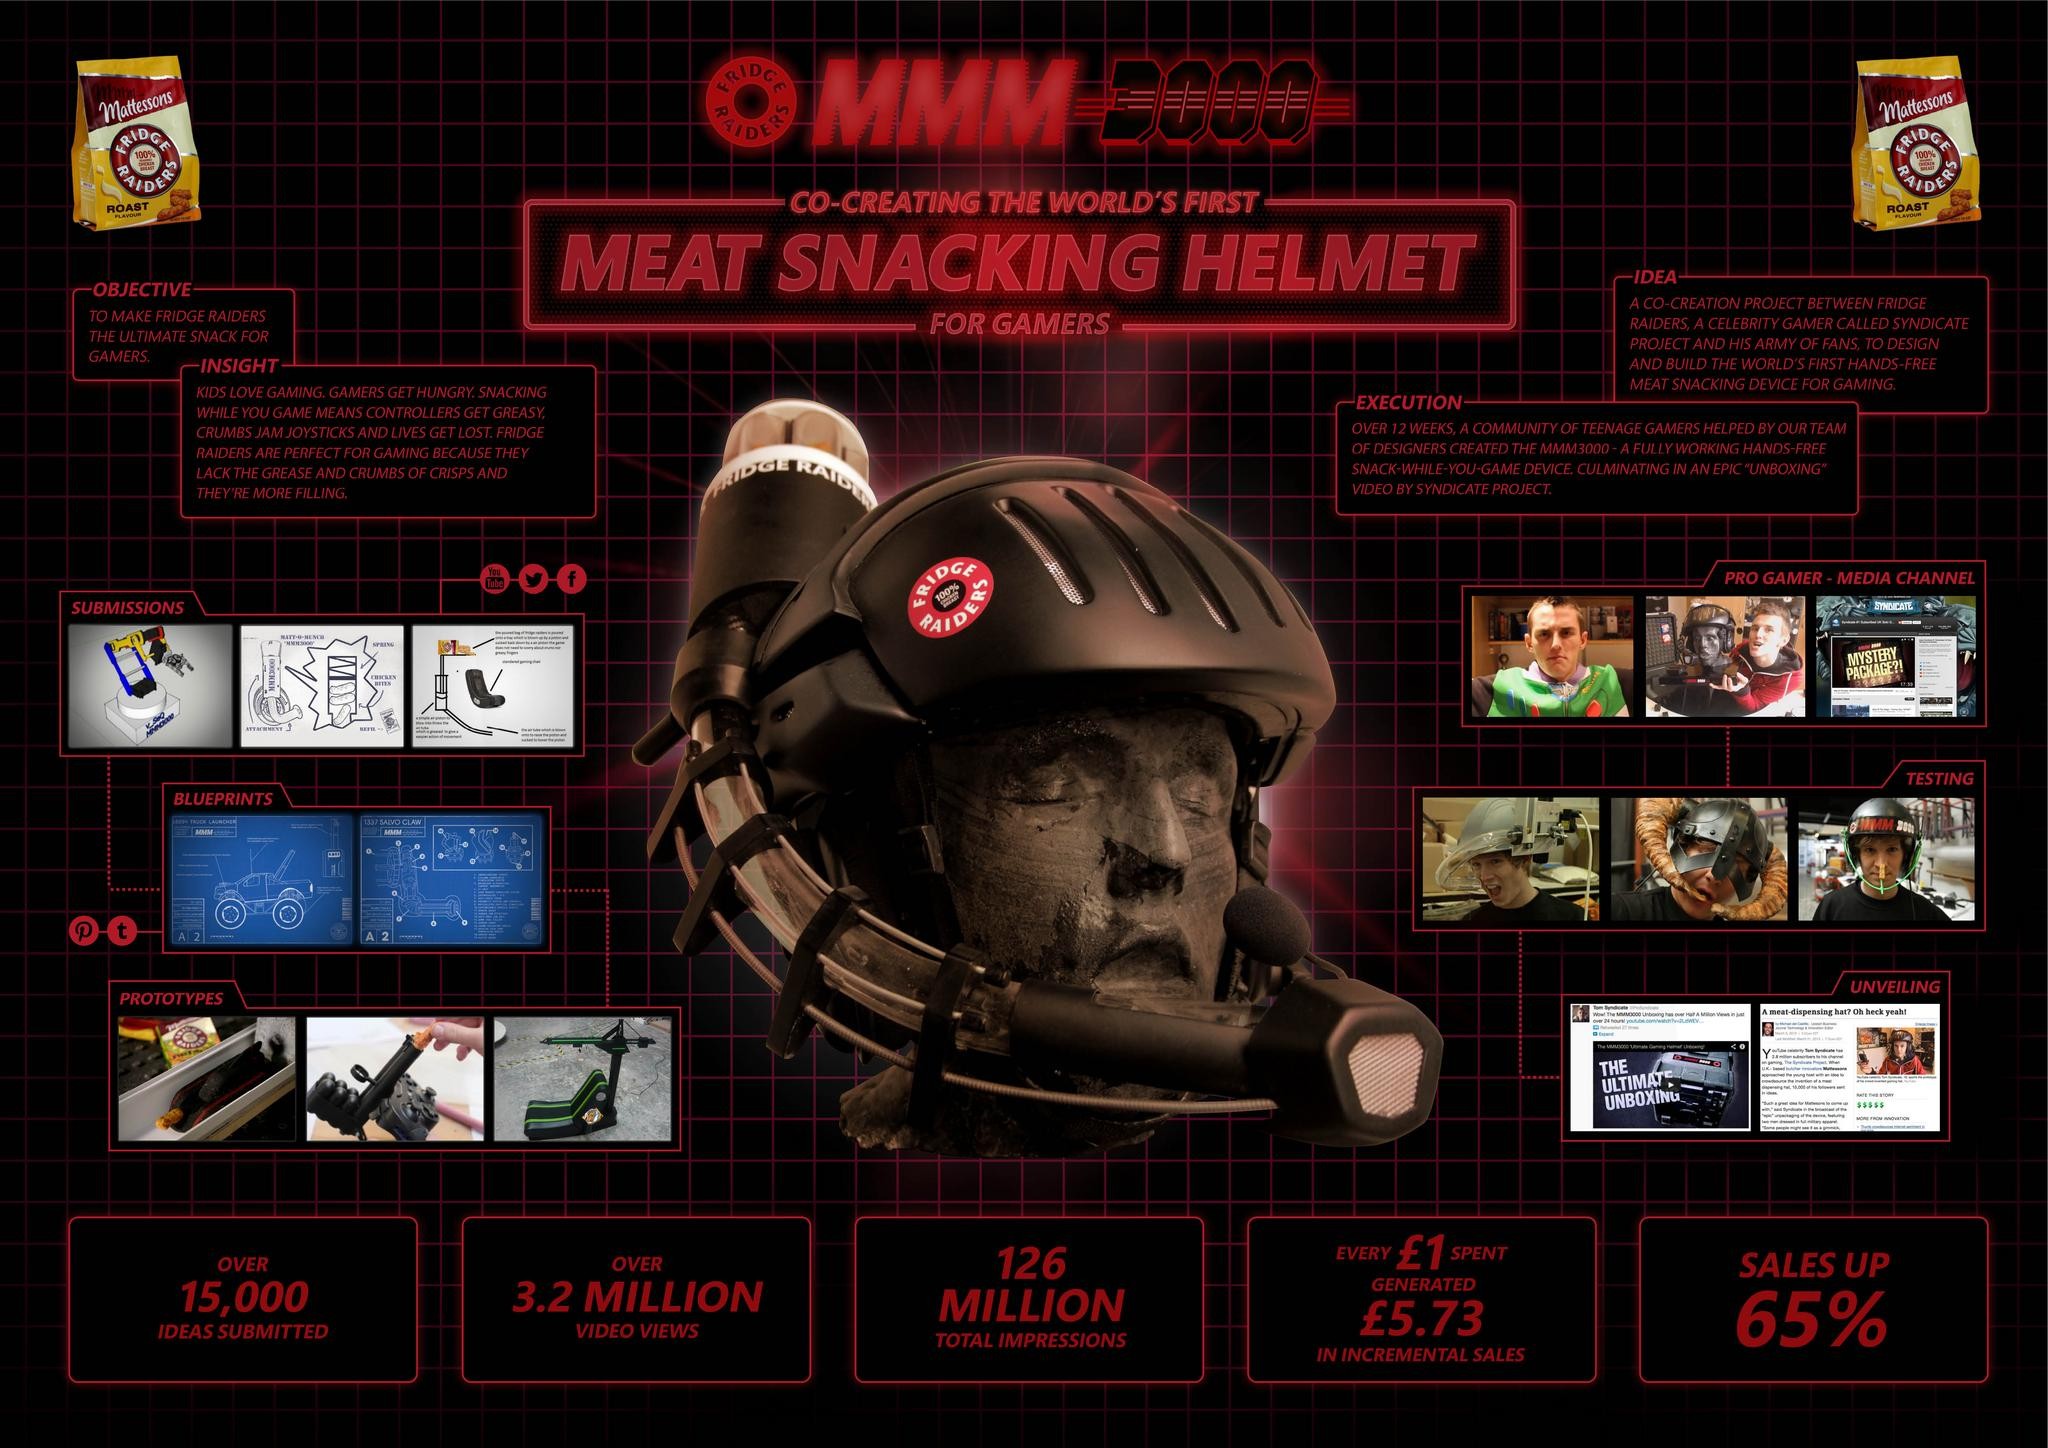 MMM3000: PROVING THAT SOCIAL CAN PAY ITS WAY IN THE REAL WORLD